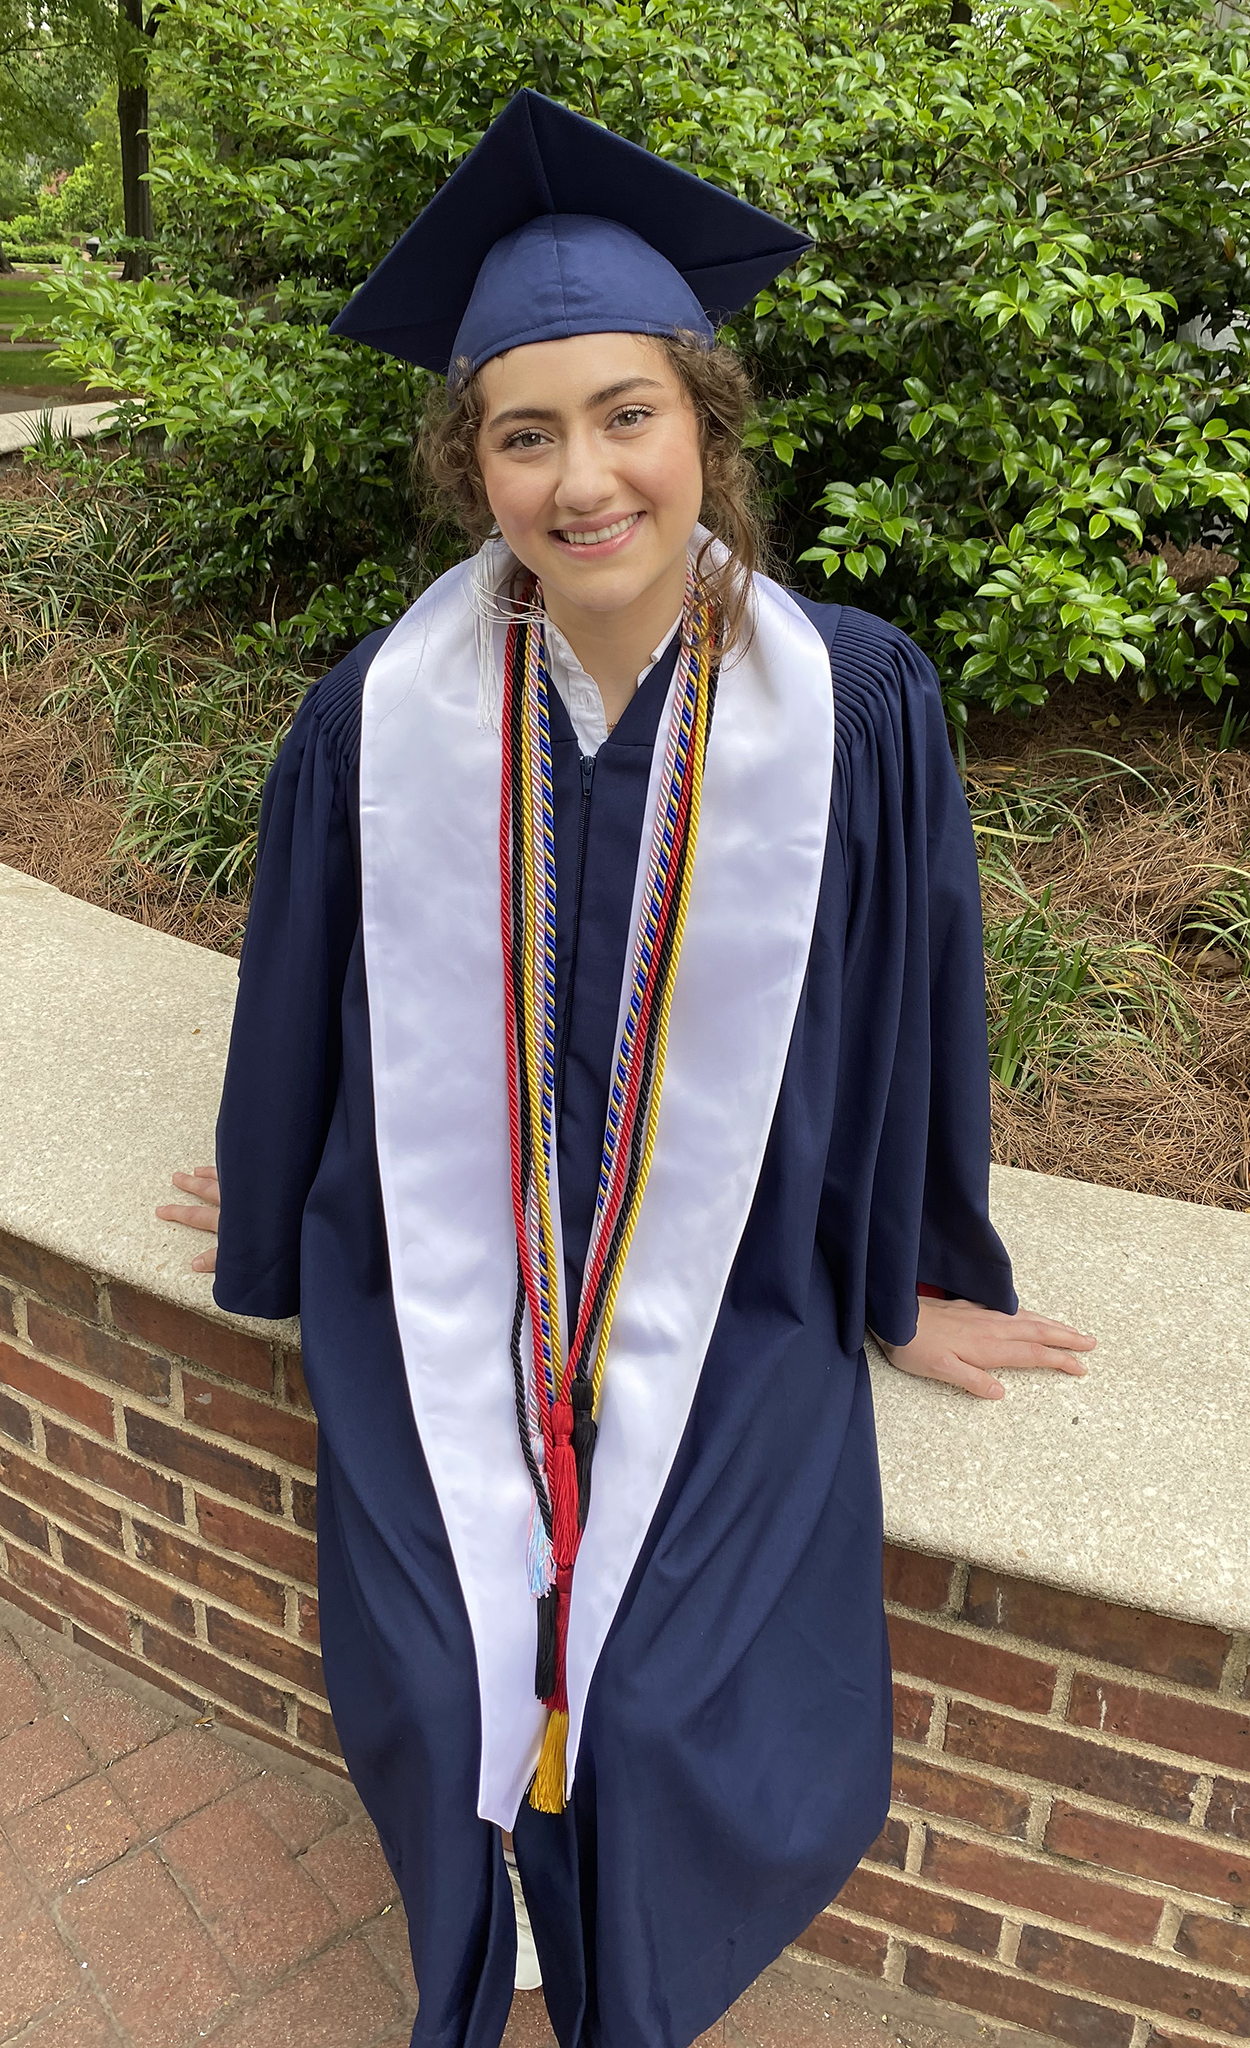 Brigitte Lewis in graduation cap and gown and cords